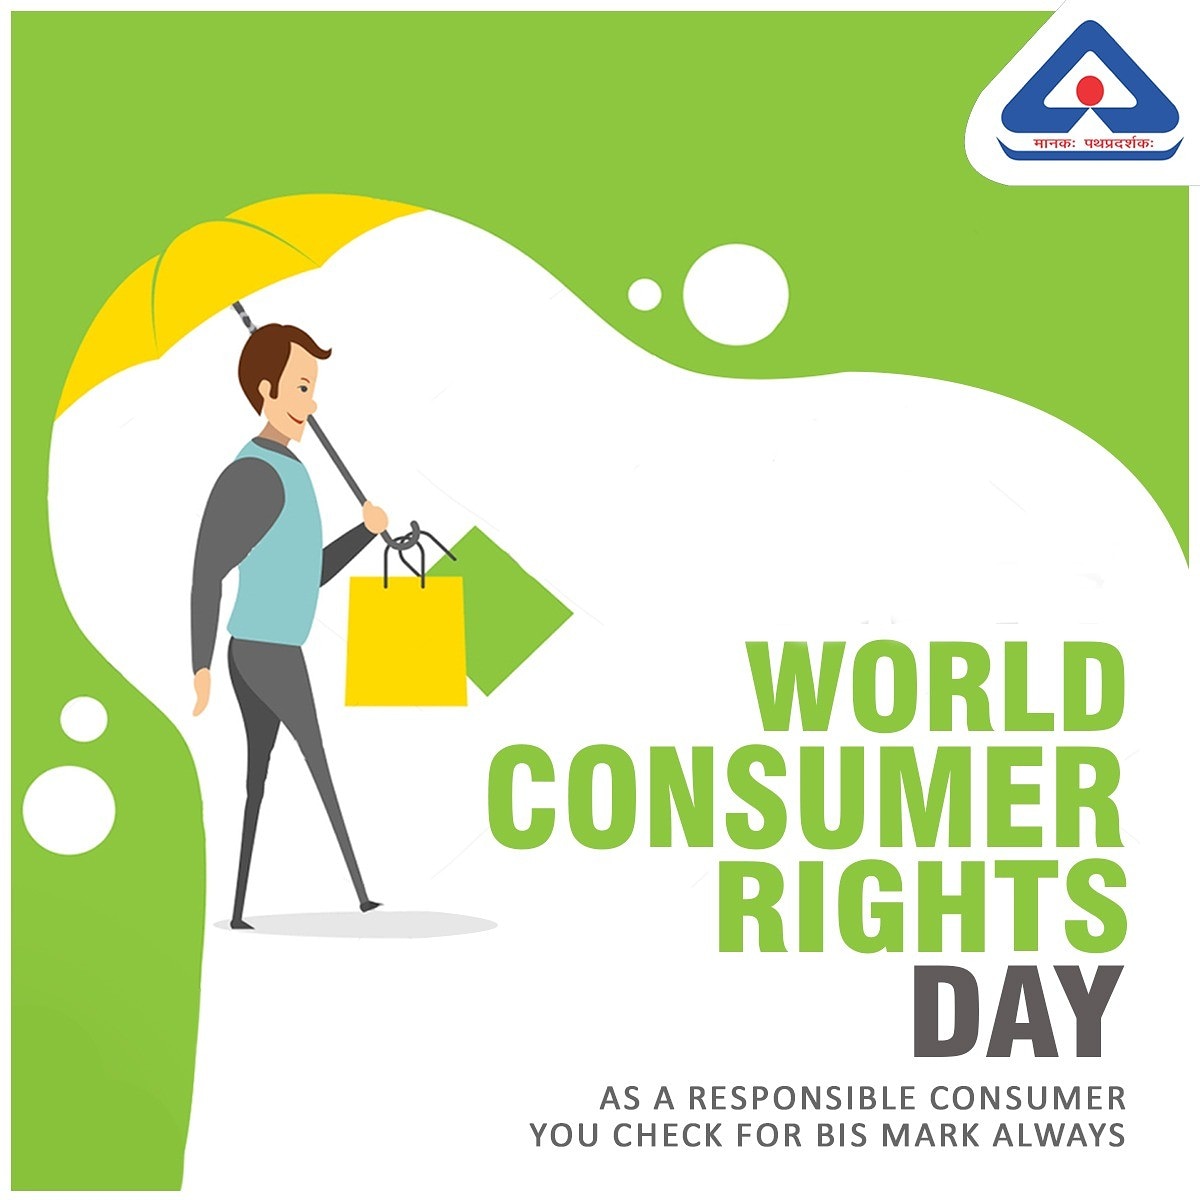 #WorldConsumerRightsDay is celebrated every year on 15 March as a means of raising global awareness about consumer rights and needs. We all look forward to continue to work together towards Protection of Consumer Rights and Consumer Empowerment. 
#ISIMarkAlways
#BISAlways